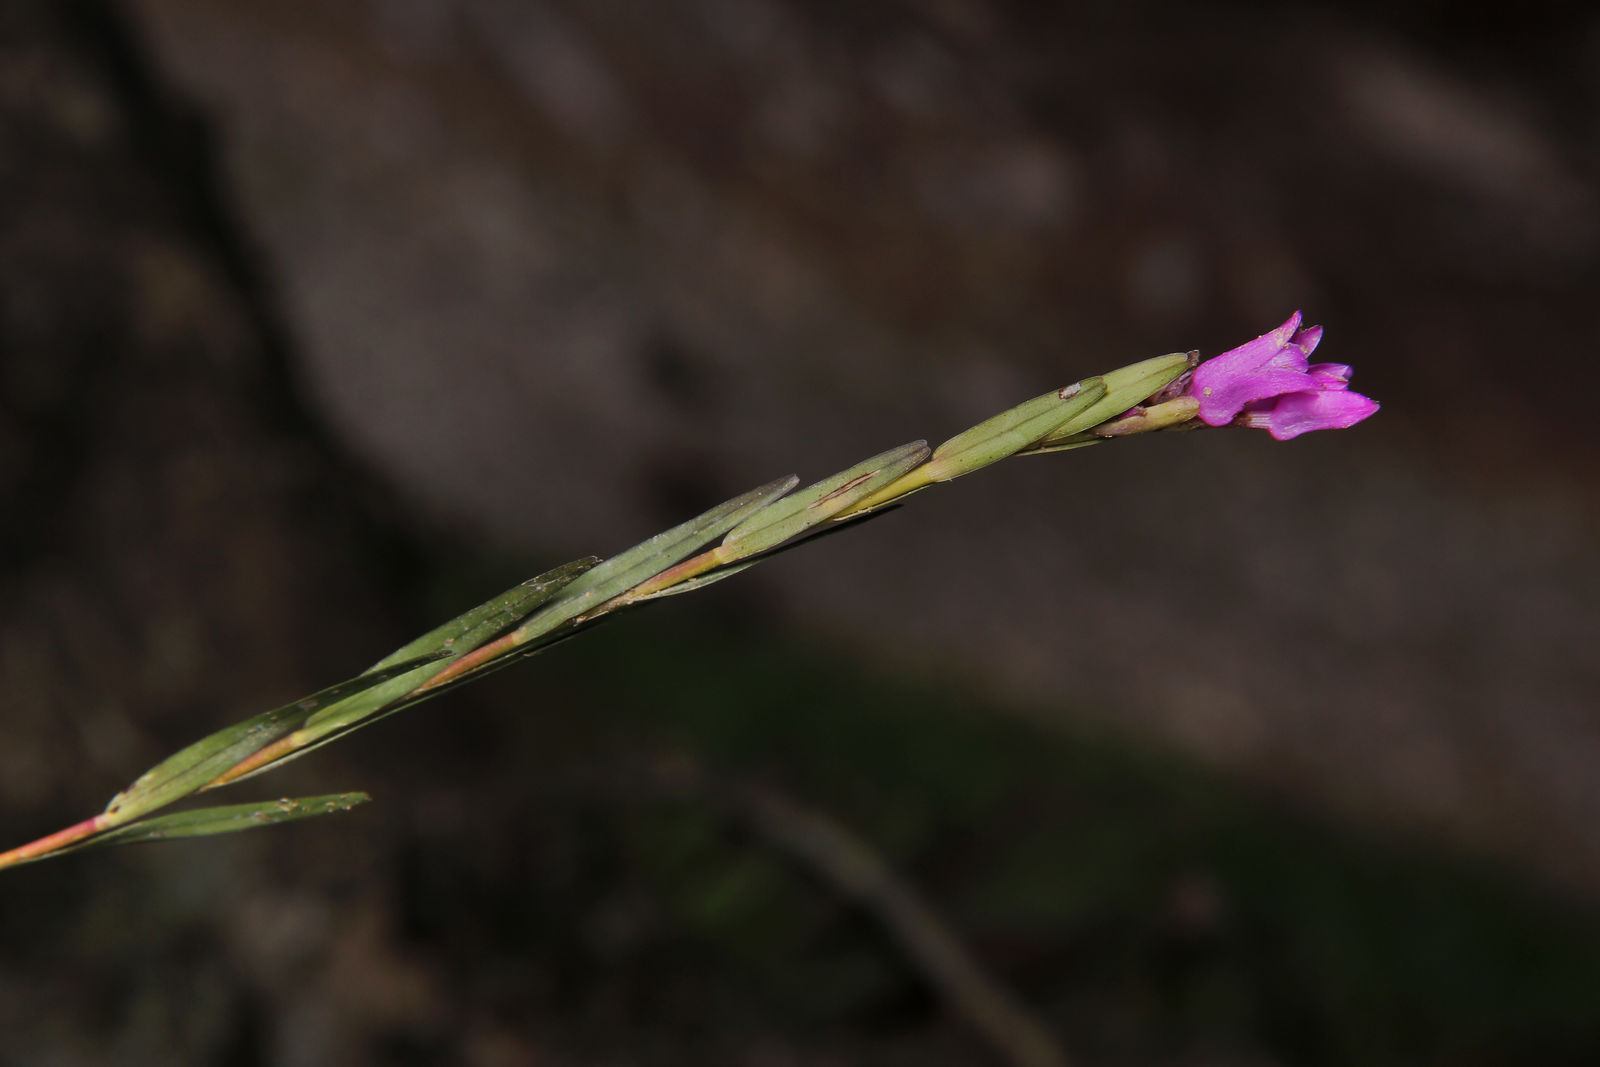 Isochilus linearis (Jacq.) R.Br. | Plants of the World Online | Kew Science